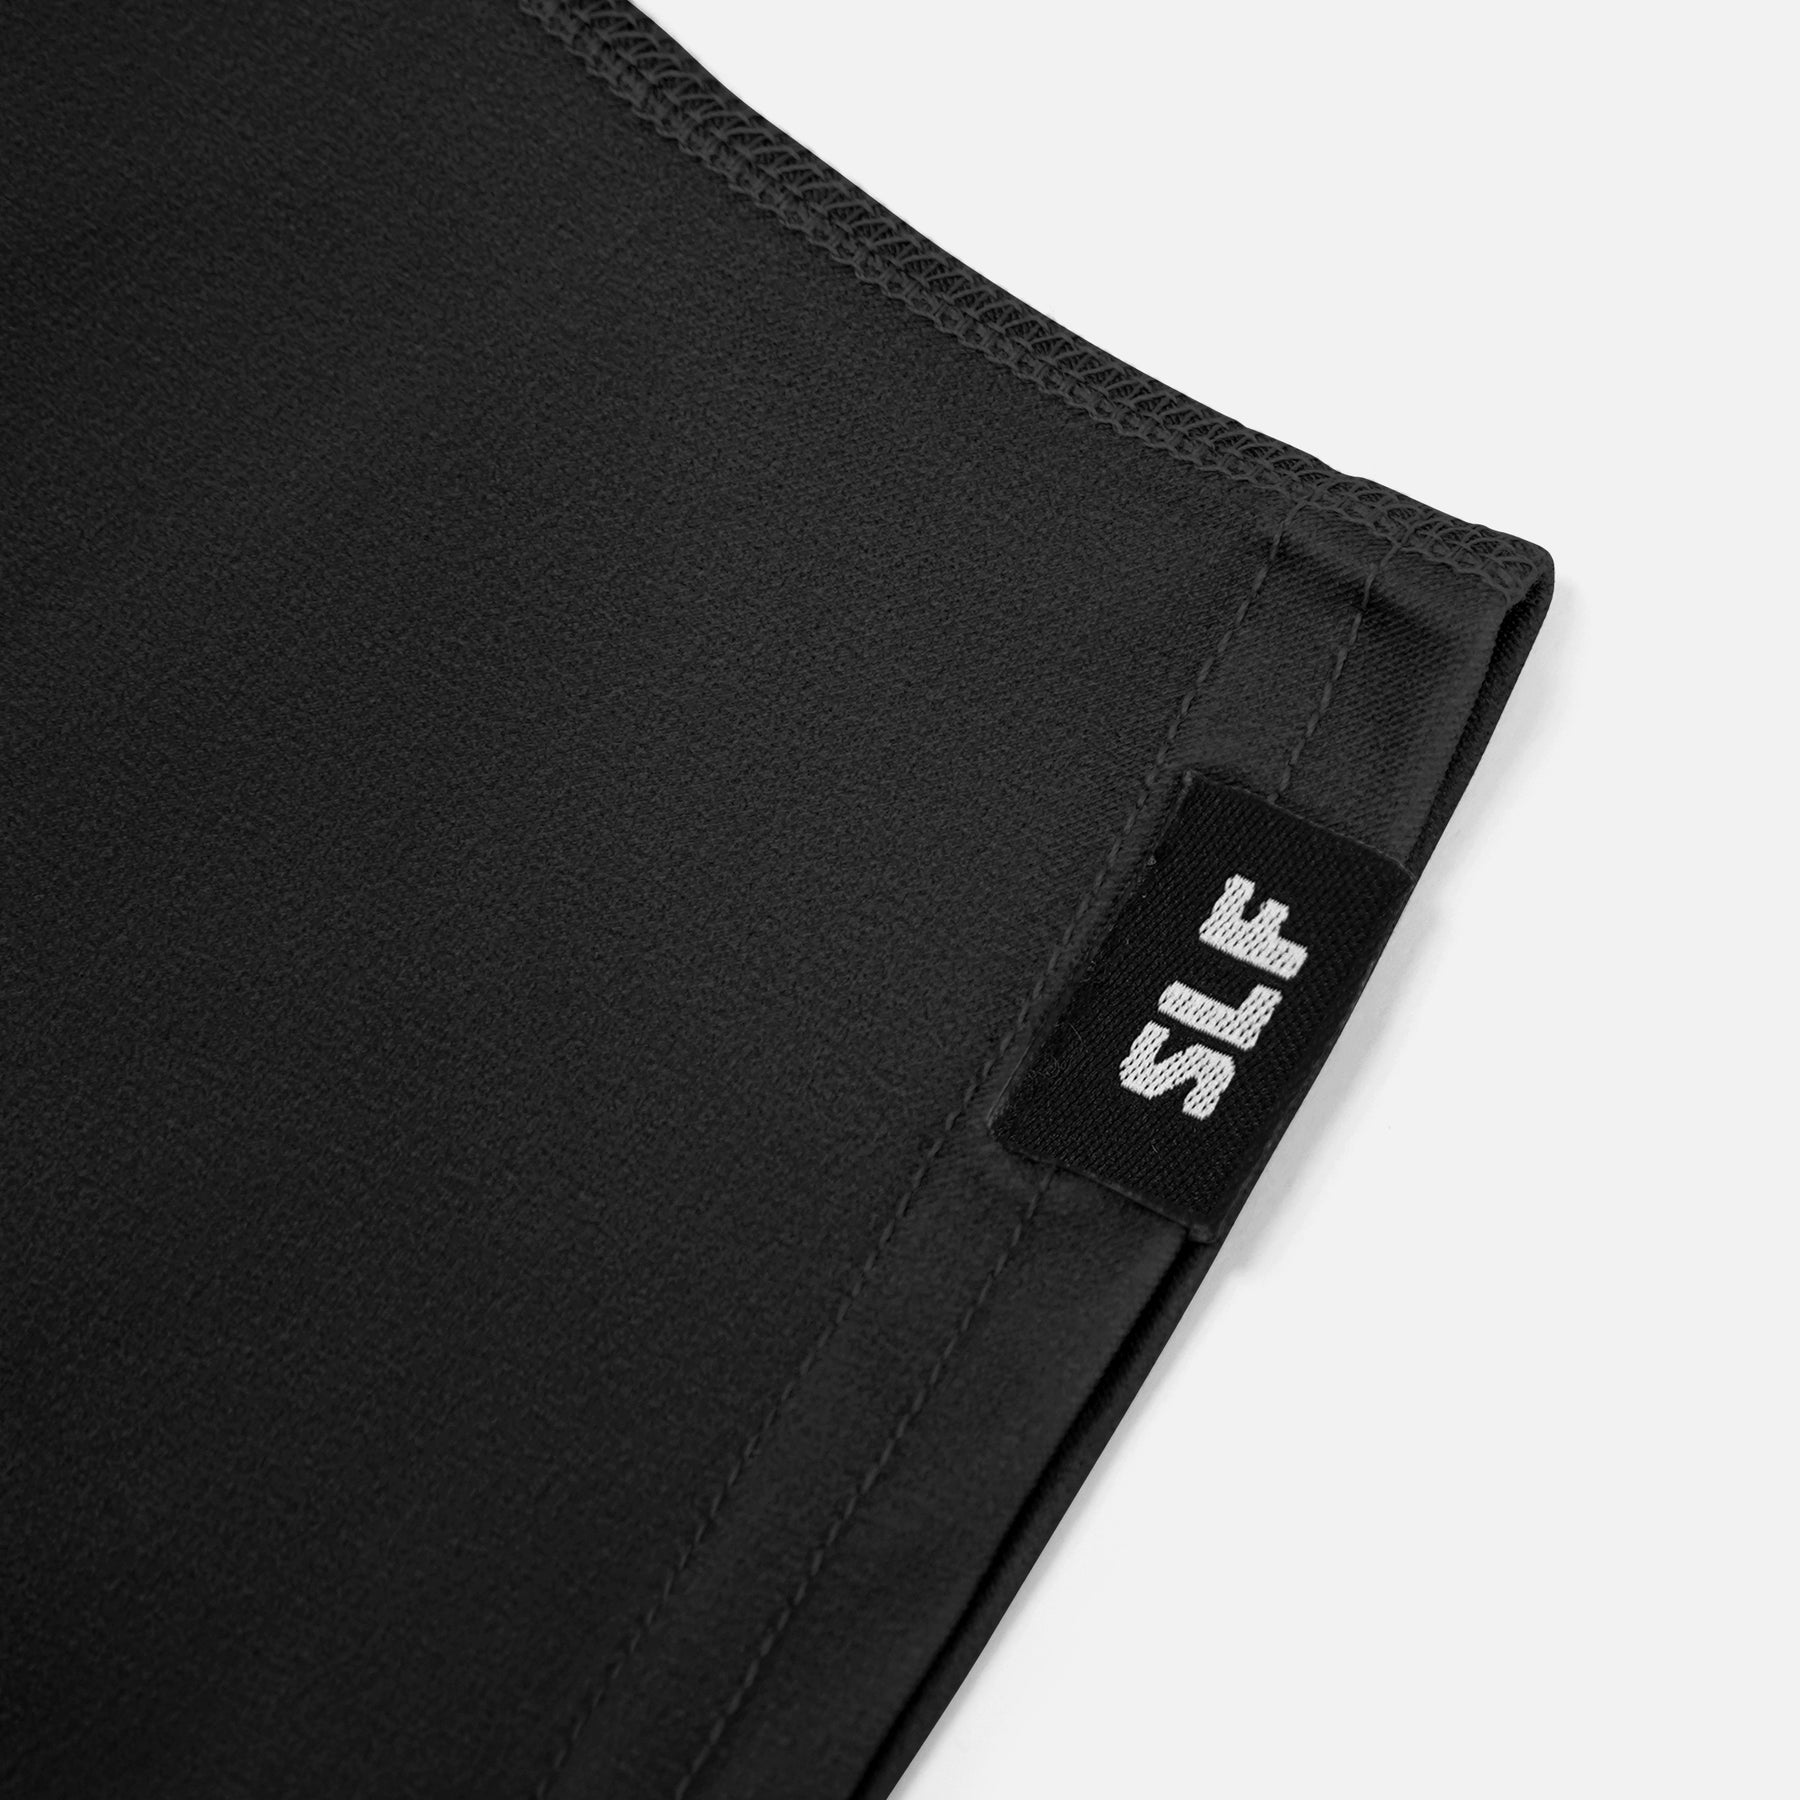 Basic Black Spats / Cleat Covers – SLEEFS